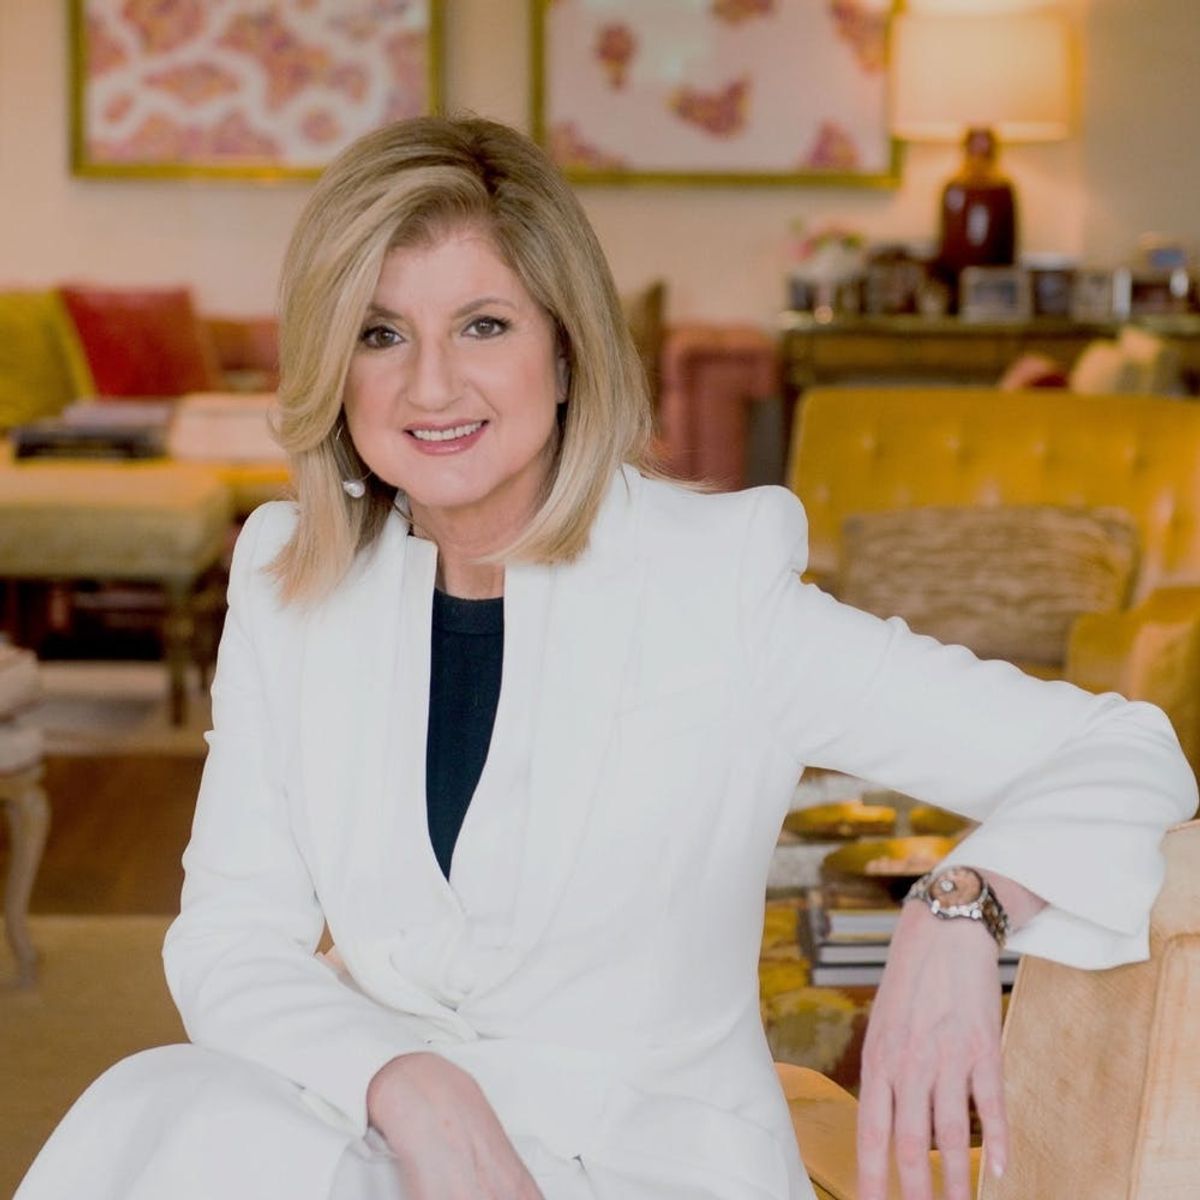 The One Healthy Thing All Successful People Do, According to Arianna Huffington